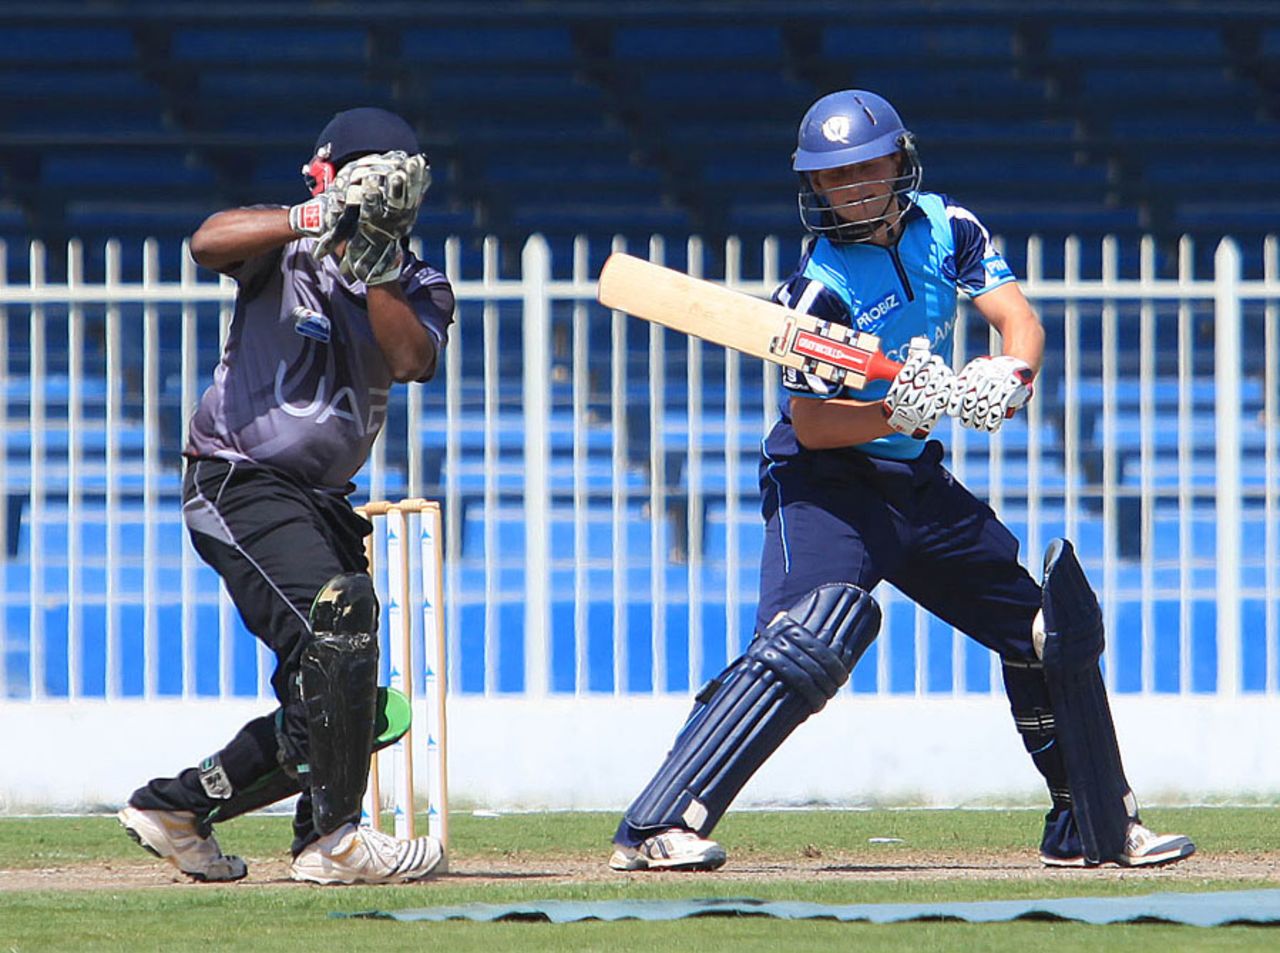 Craig Wallace top-scored for Scotland with 40, UAE v Scotland, ICC World Cricket Championship, Sharjah, March, 7, 2012